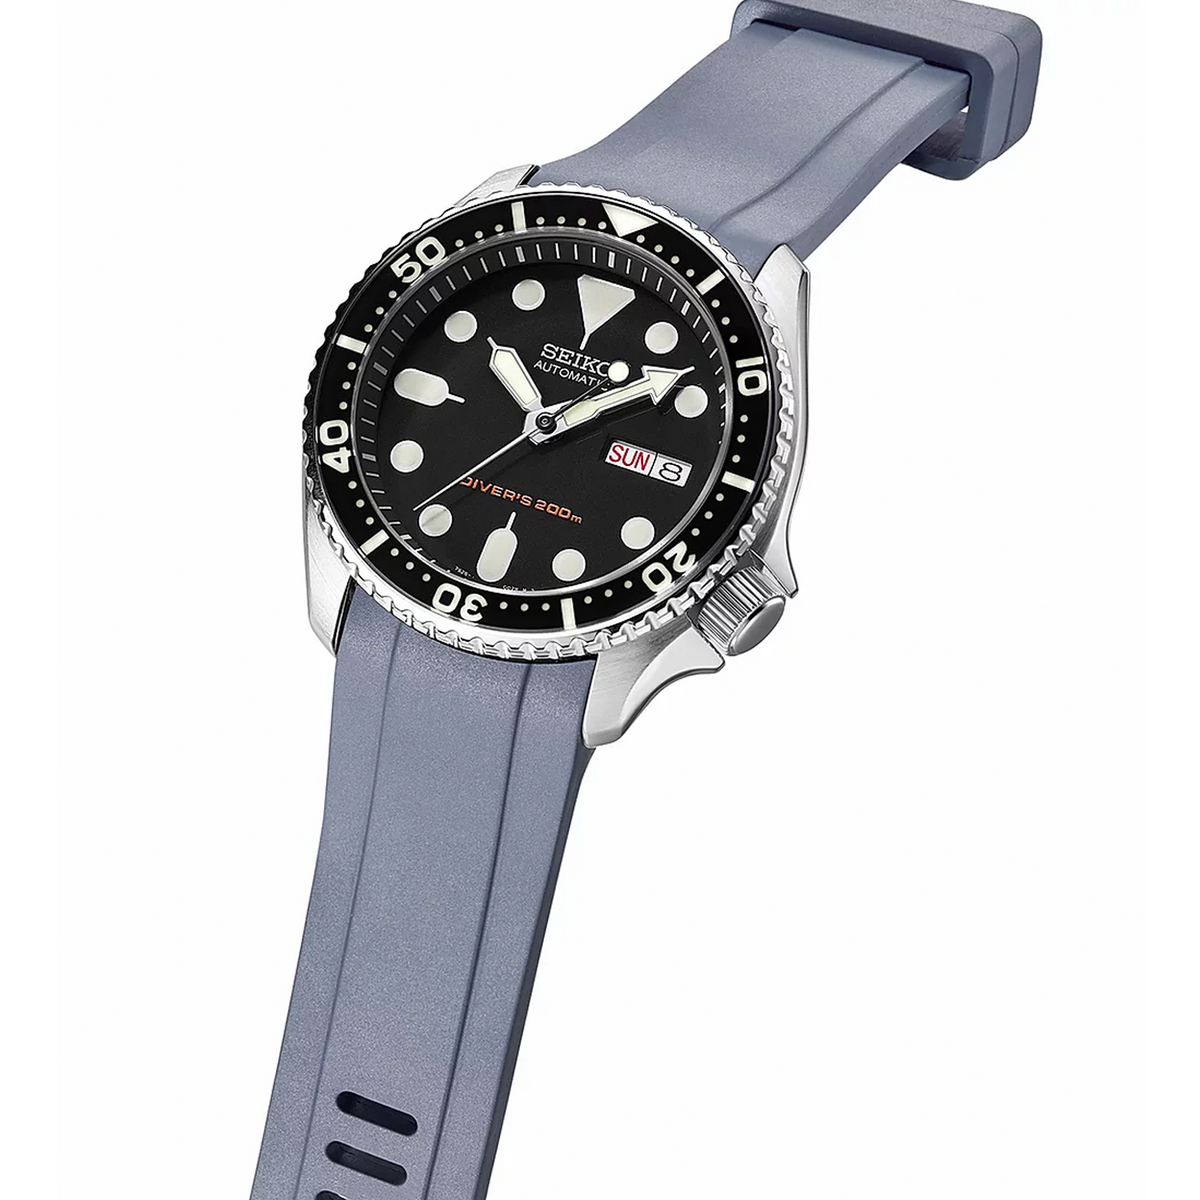 Crafter Blue - Fitted End Rubber Strap for Seiko SKX, New 5 Sport